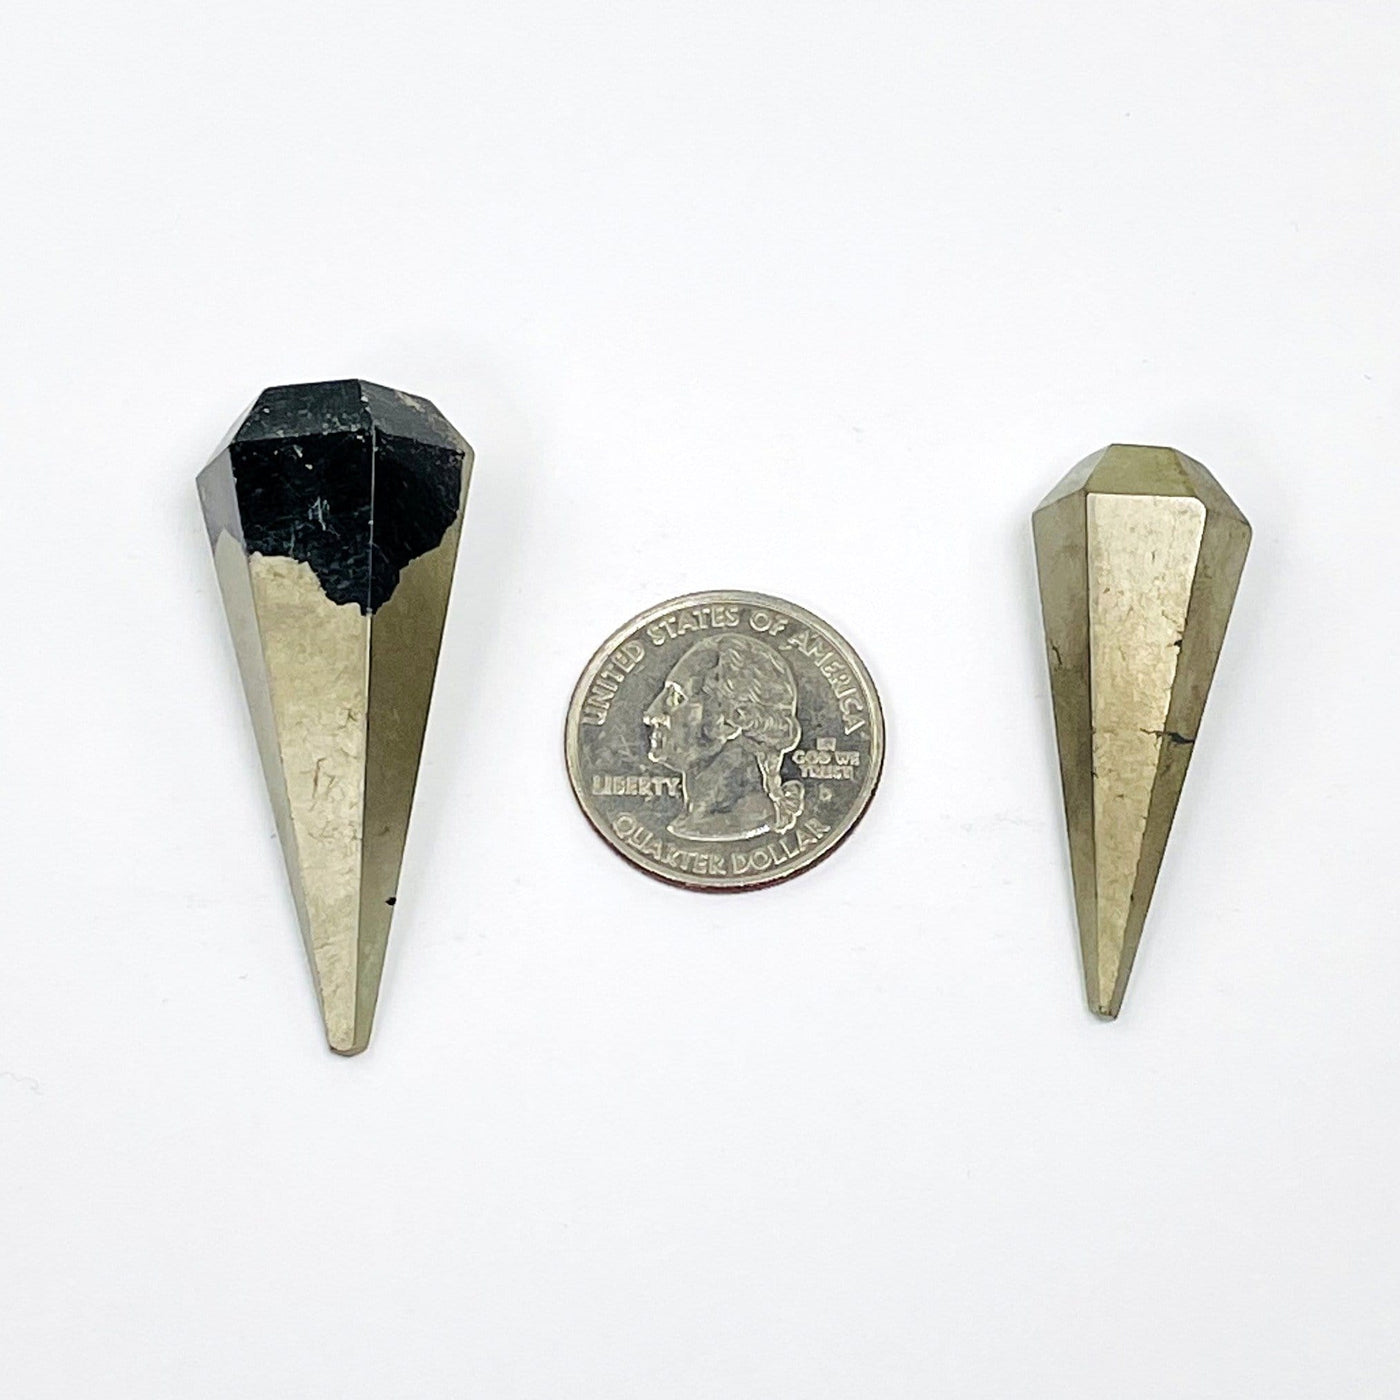 2 pyrite pendulum points next to a quarter for size reference 